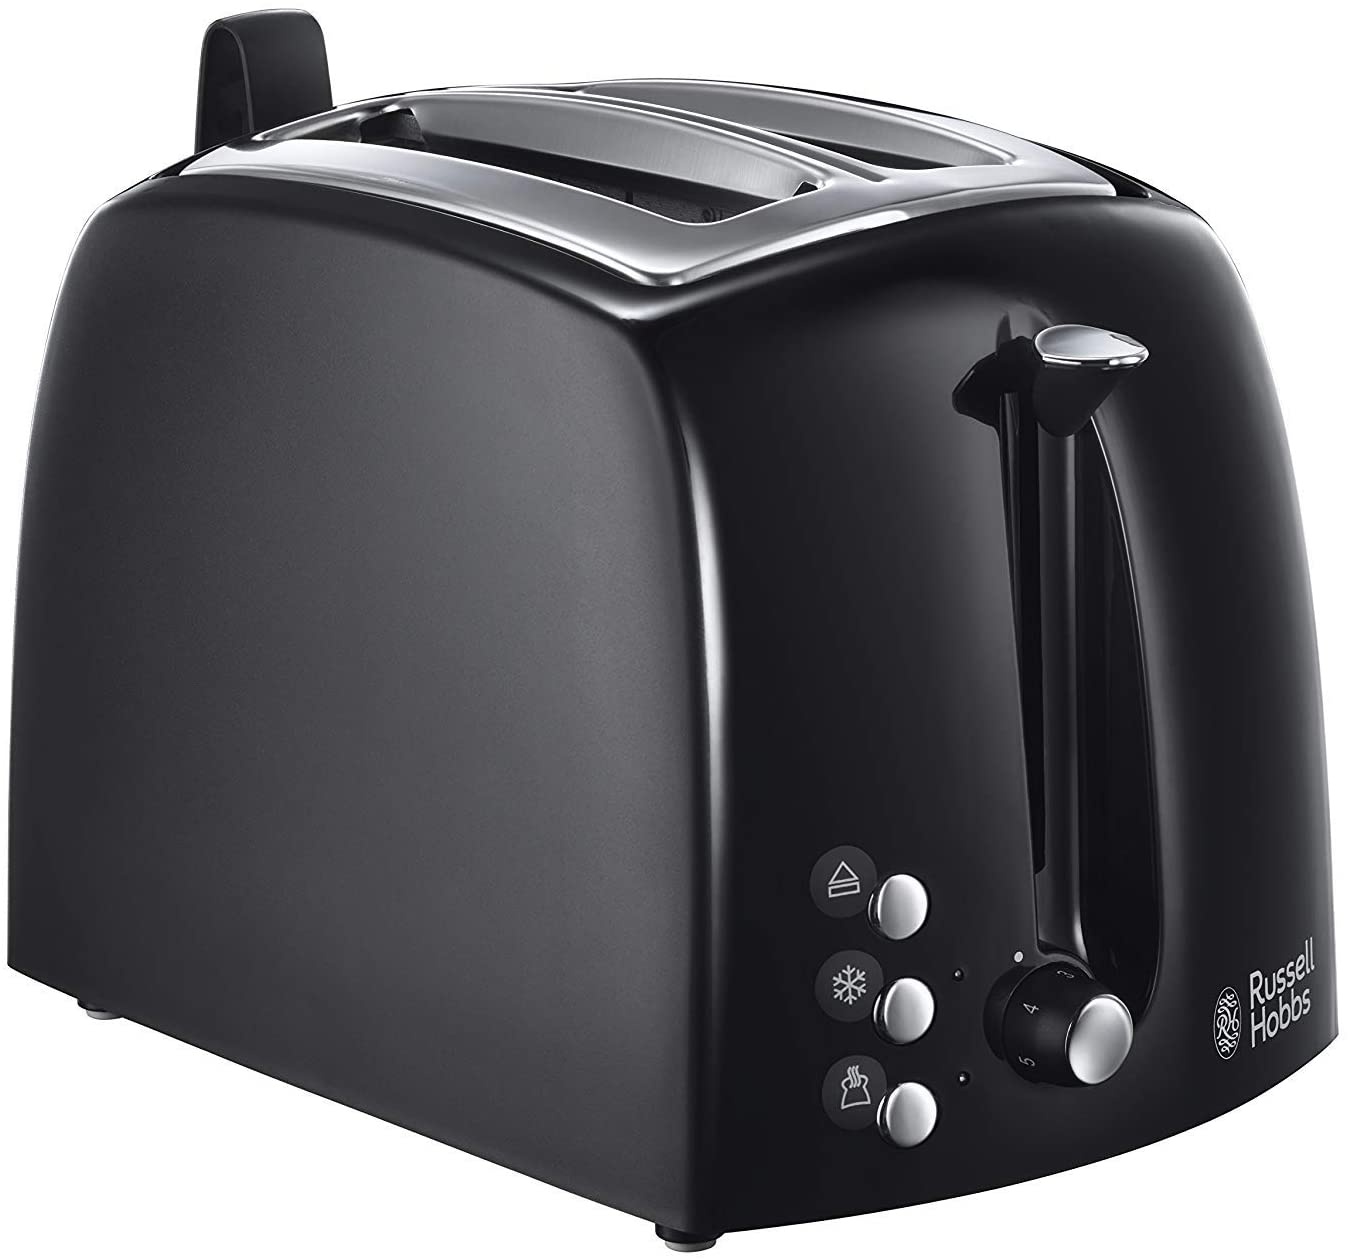 Russell Hobbs Toaster Textures +, 2 extra wide toast slots, 22601-56